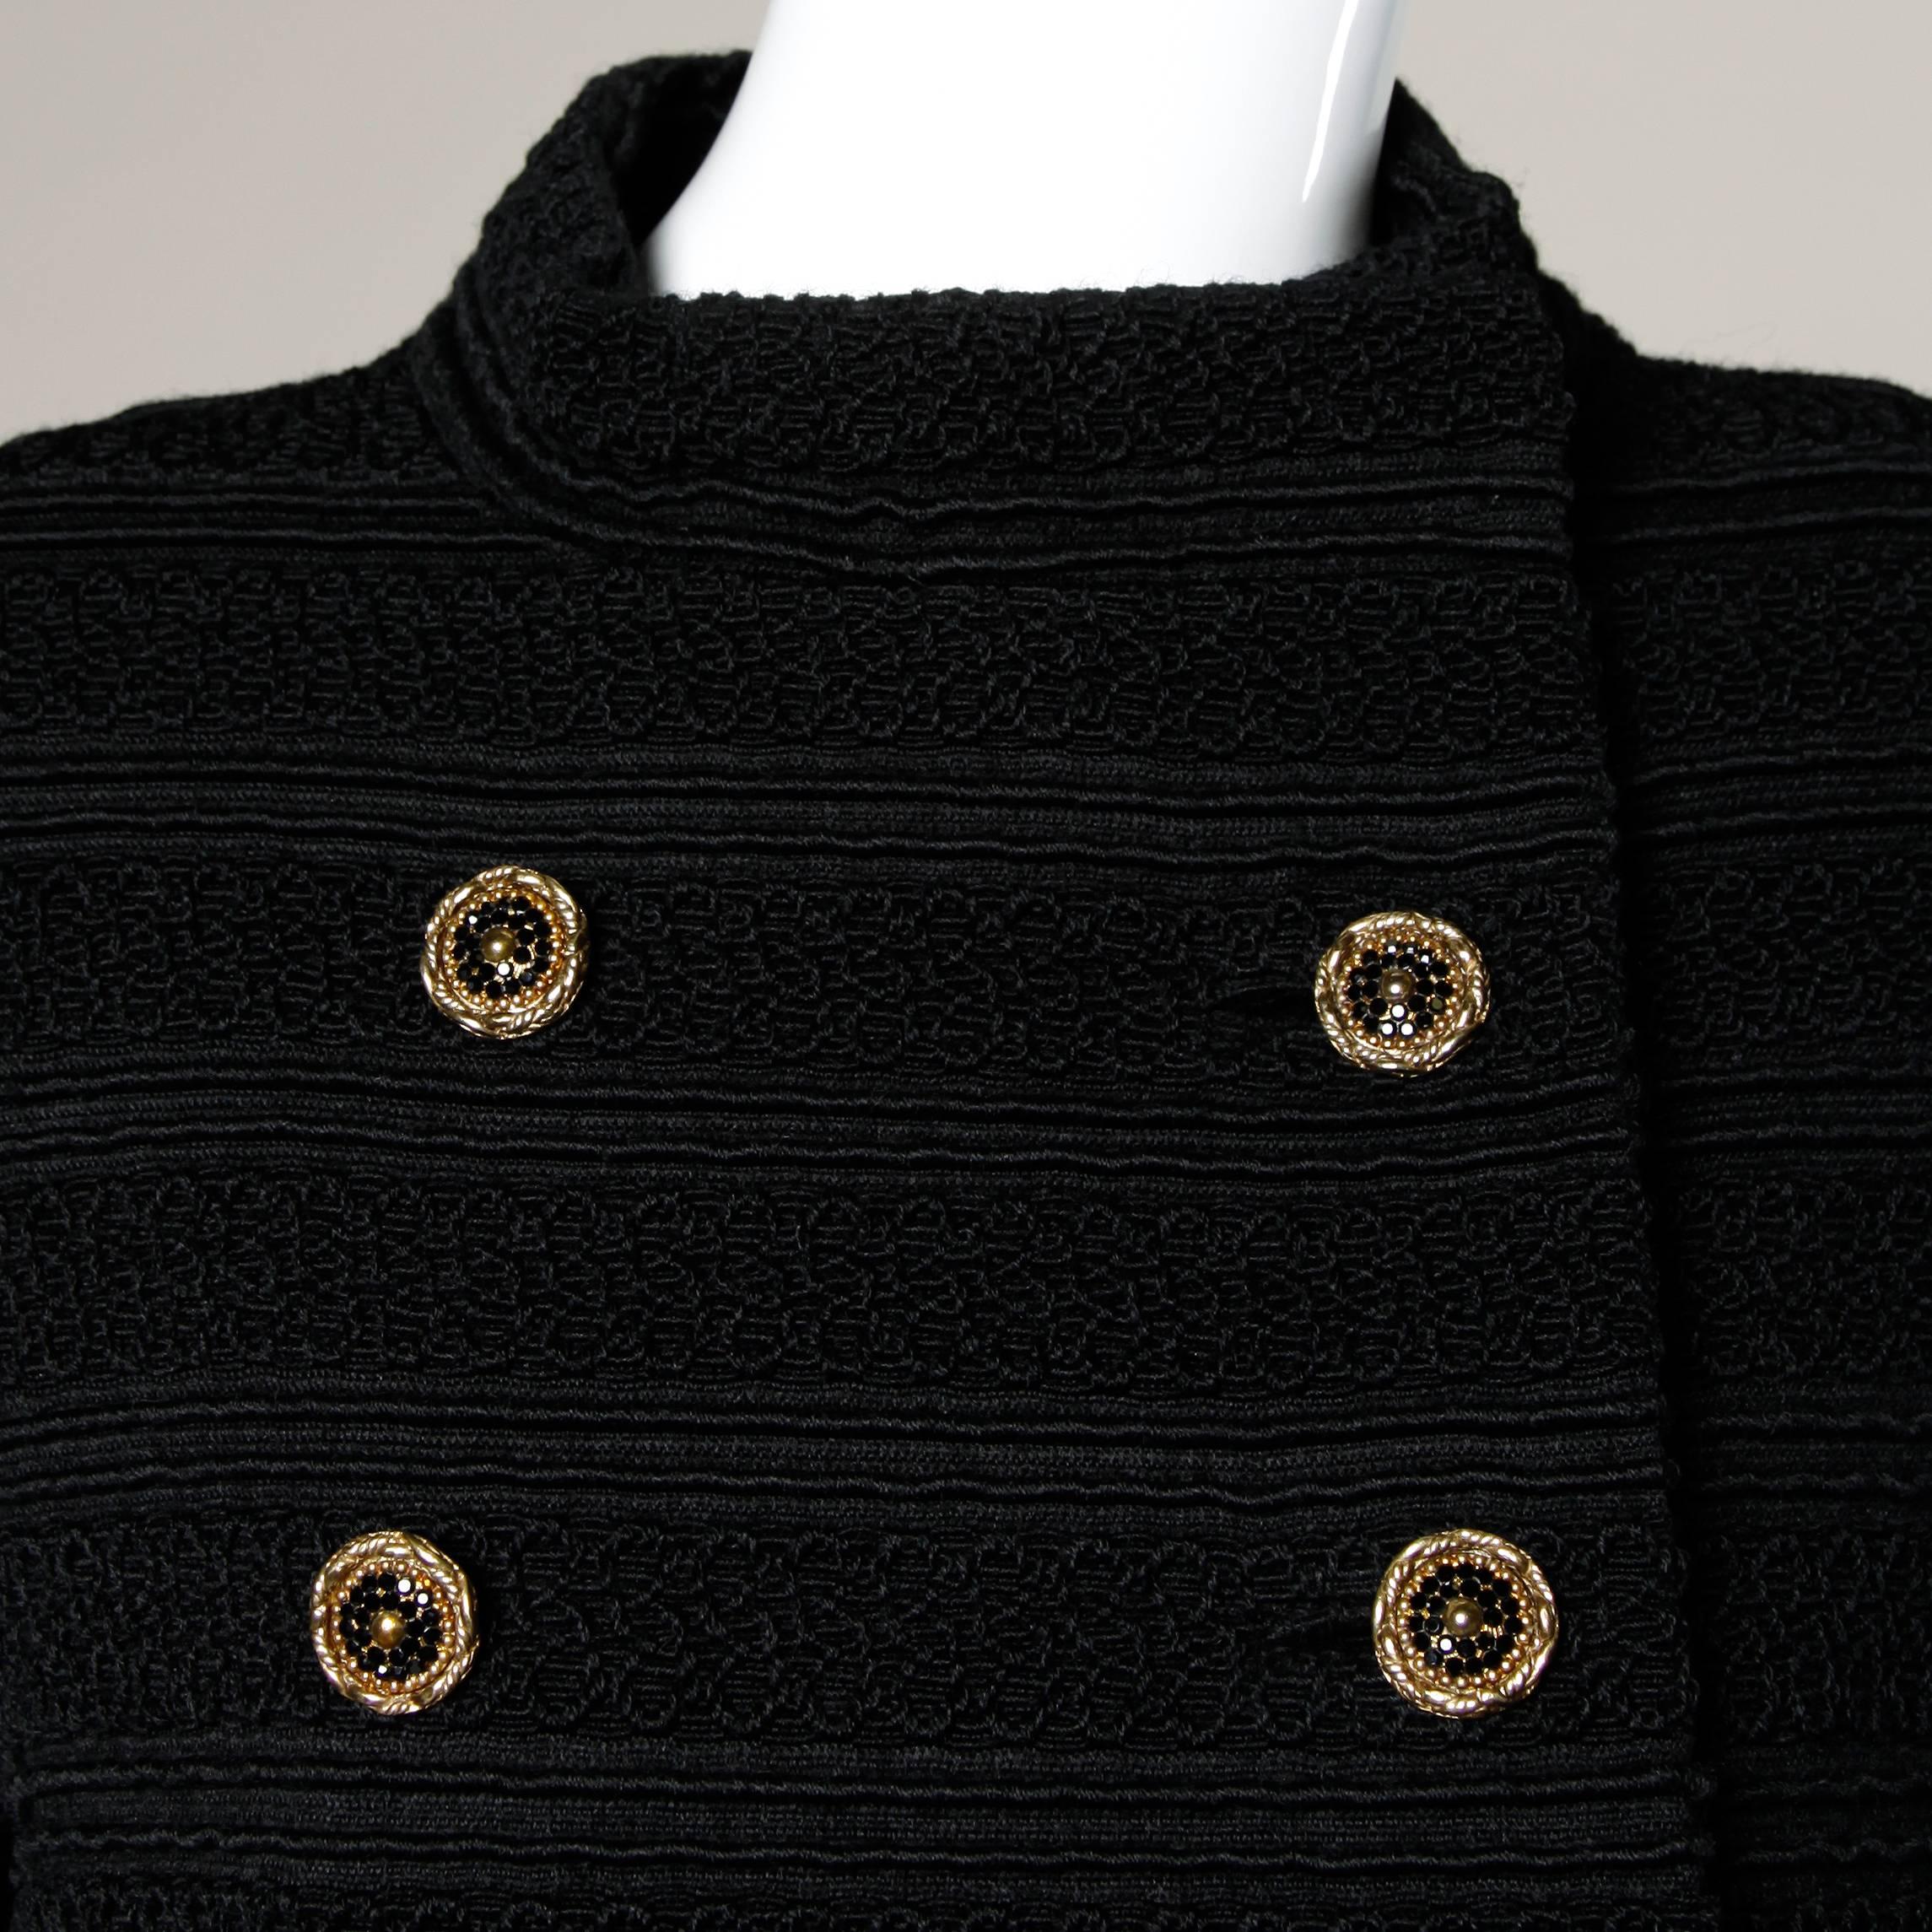 1960s Vintage Wool Mod Coat with Military Chain Detail + Rhinestone Buttons 1